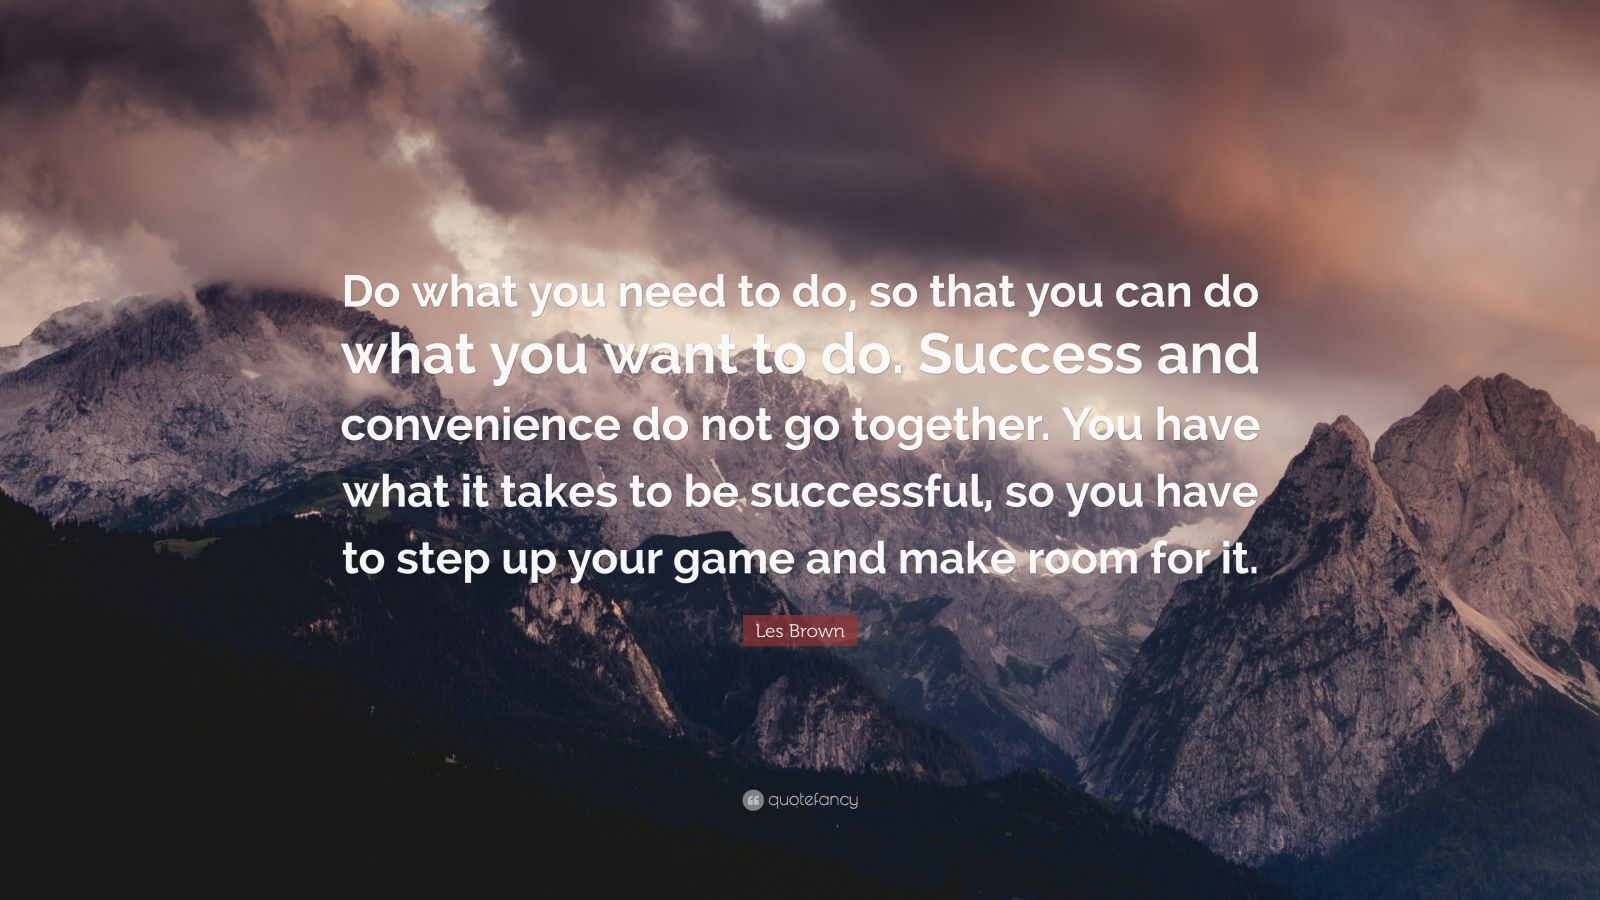 Les Brown Quote: “Do what you need to do, so that you can do what you ...